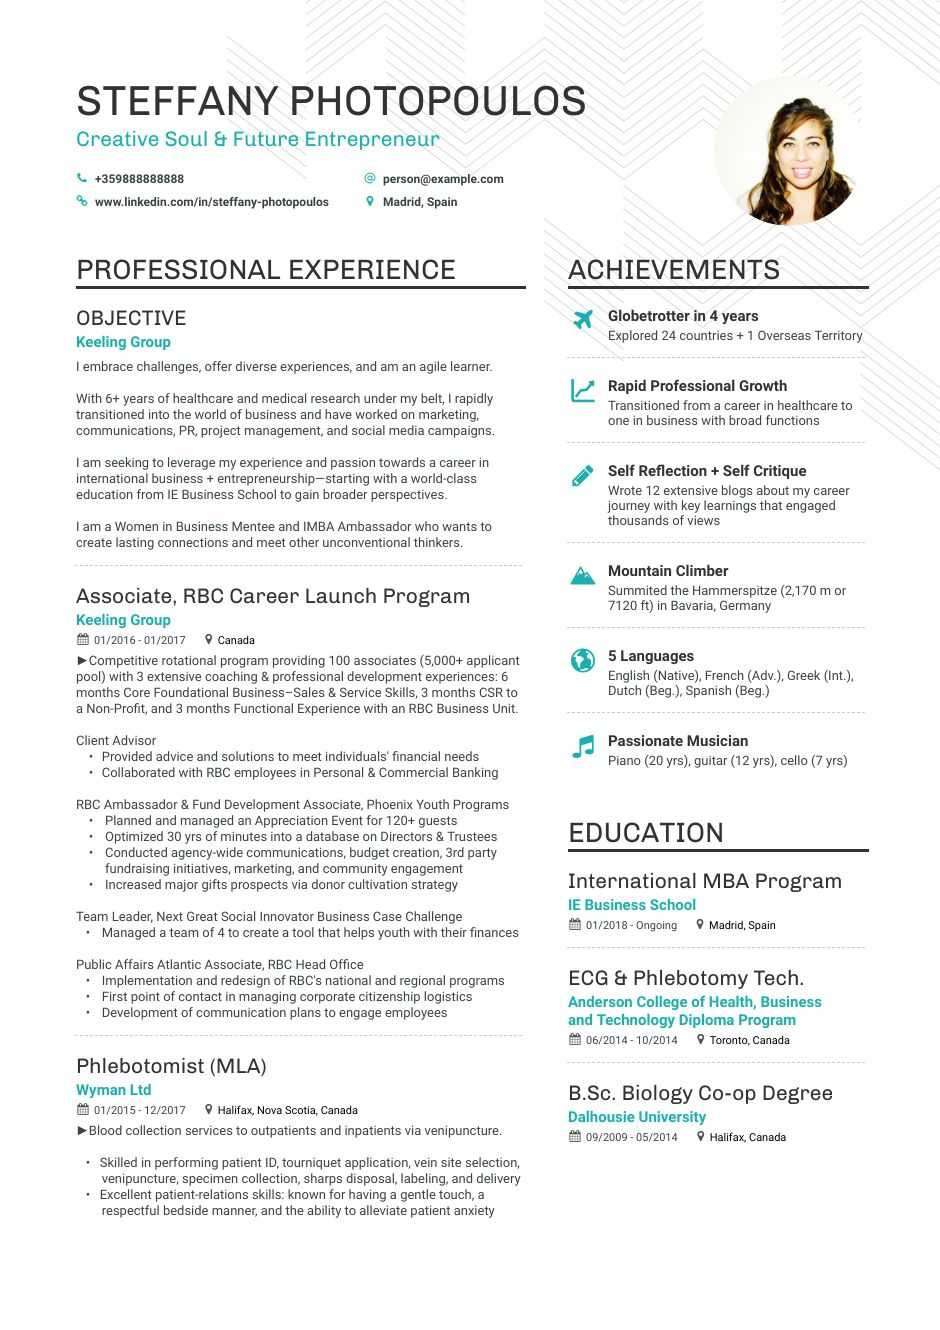 Temple Fox School Of Business Resume Template Career Change Resume Examples, Skills, Templates & More for 2021